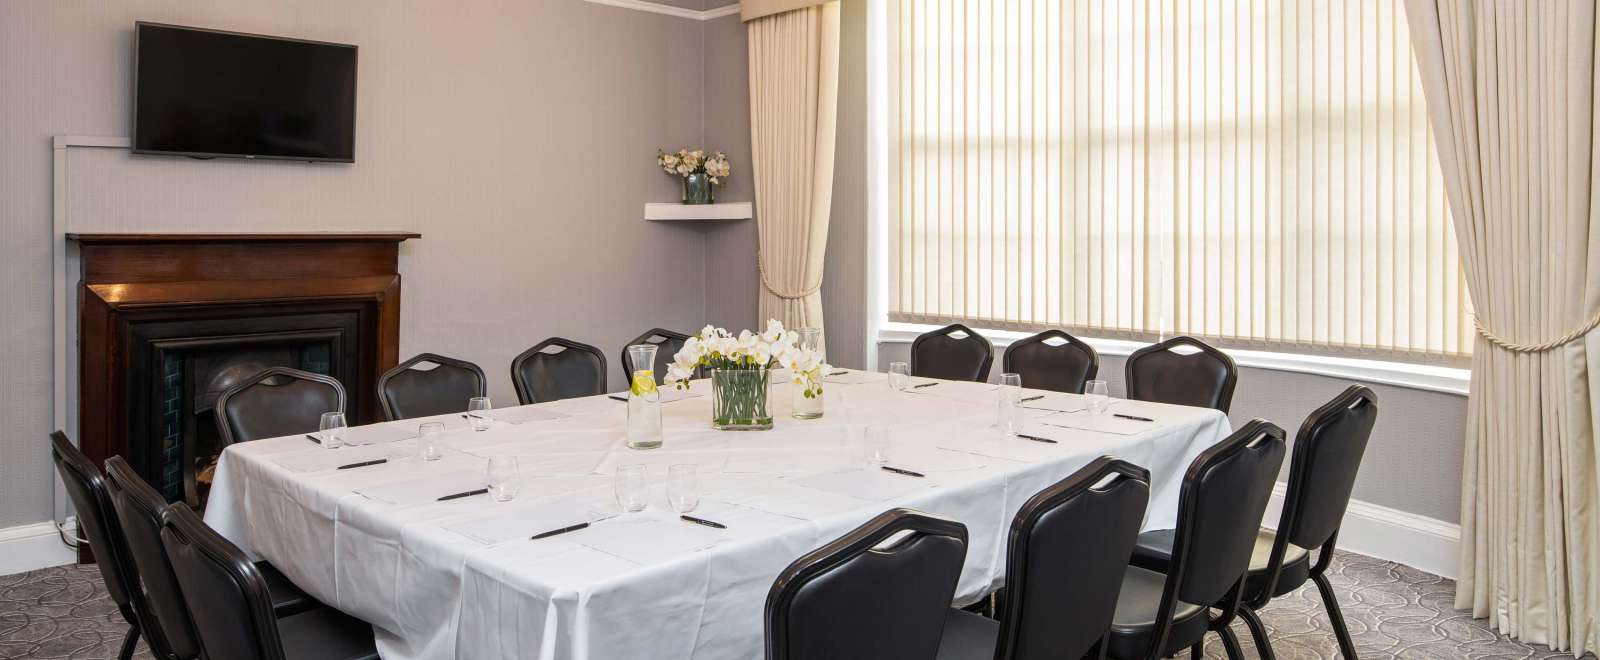 Royal and Fortescue Hotel Florence Room Set Up for Conference or Meeting